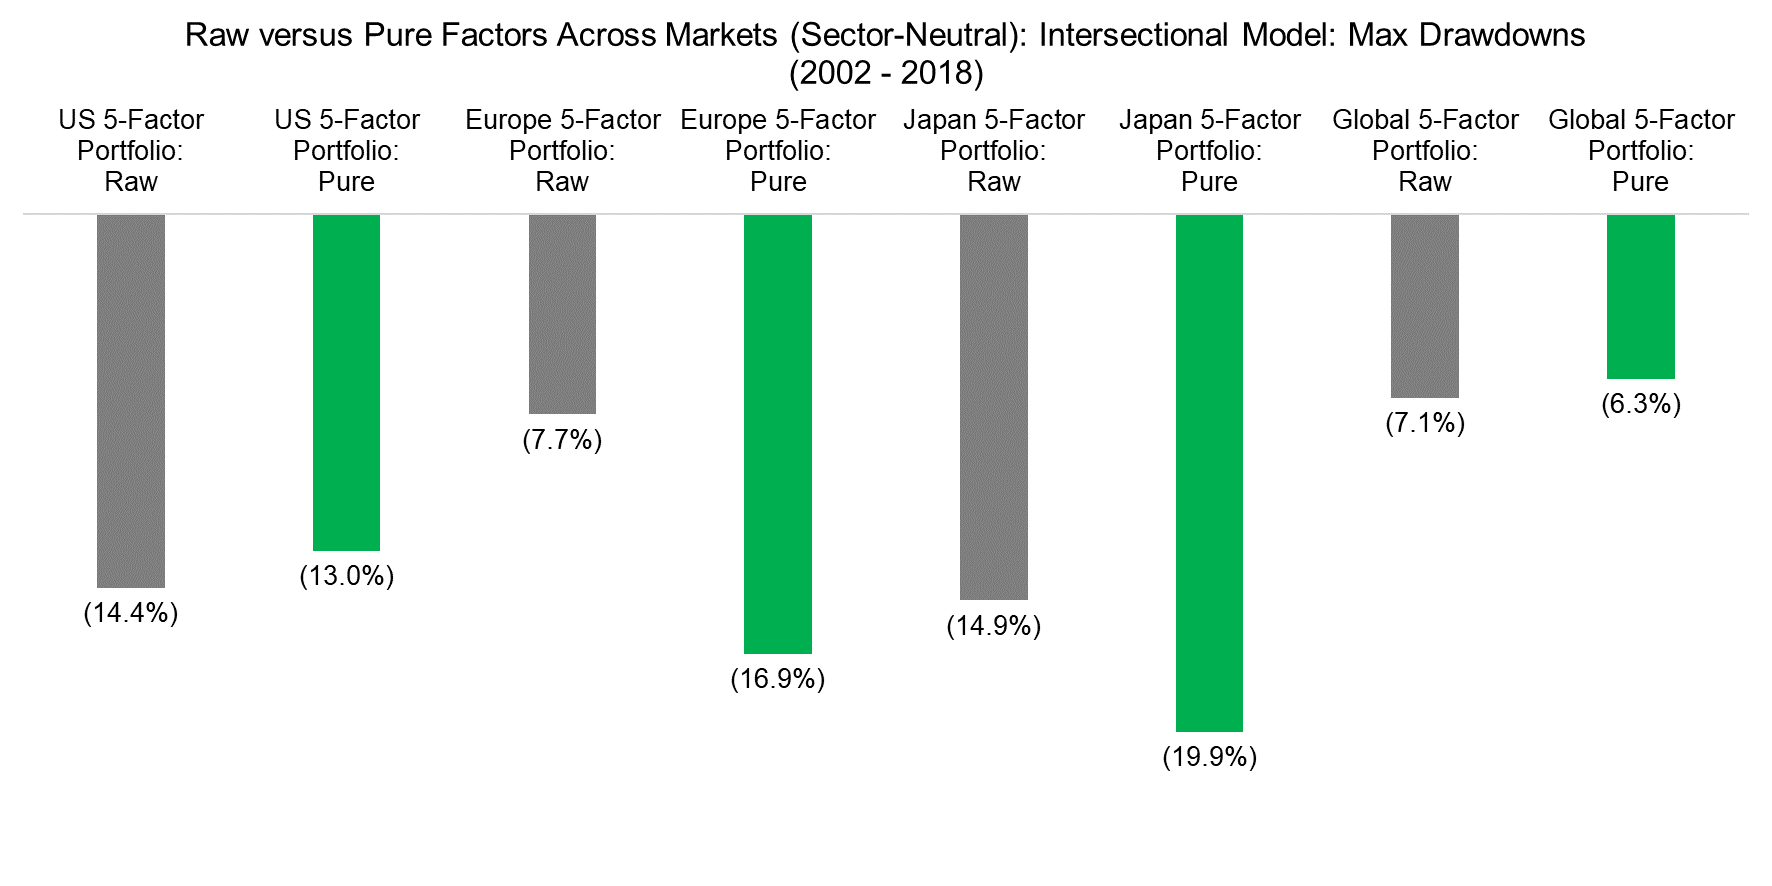 Raw versus Pure Factors Across Markets (Sector-Neutral) Intersectional Model Max Drawdowns (2002 - 2018